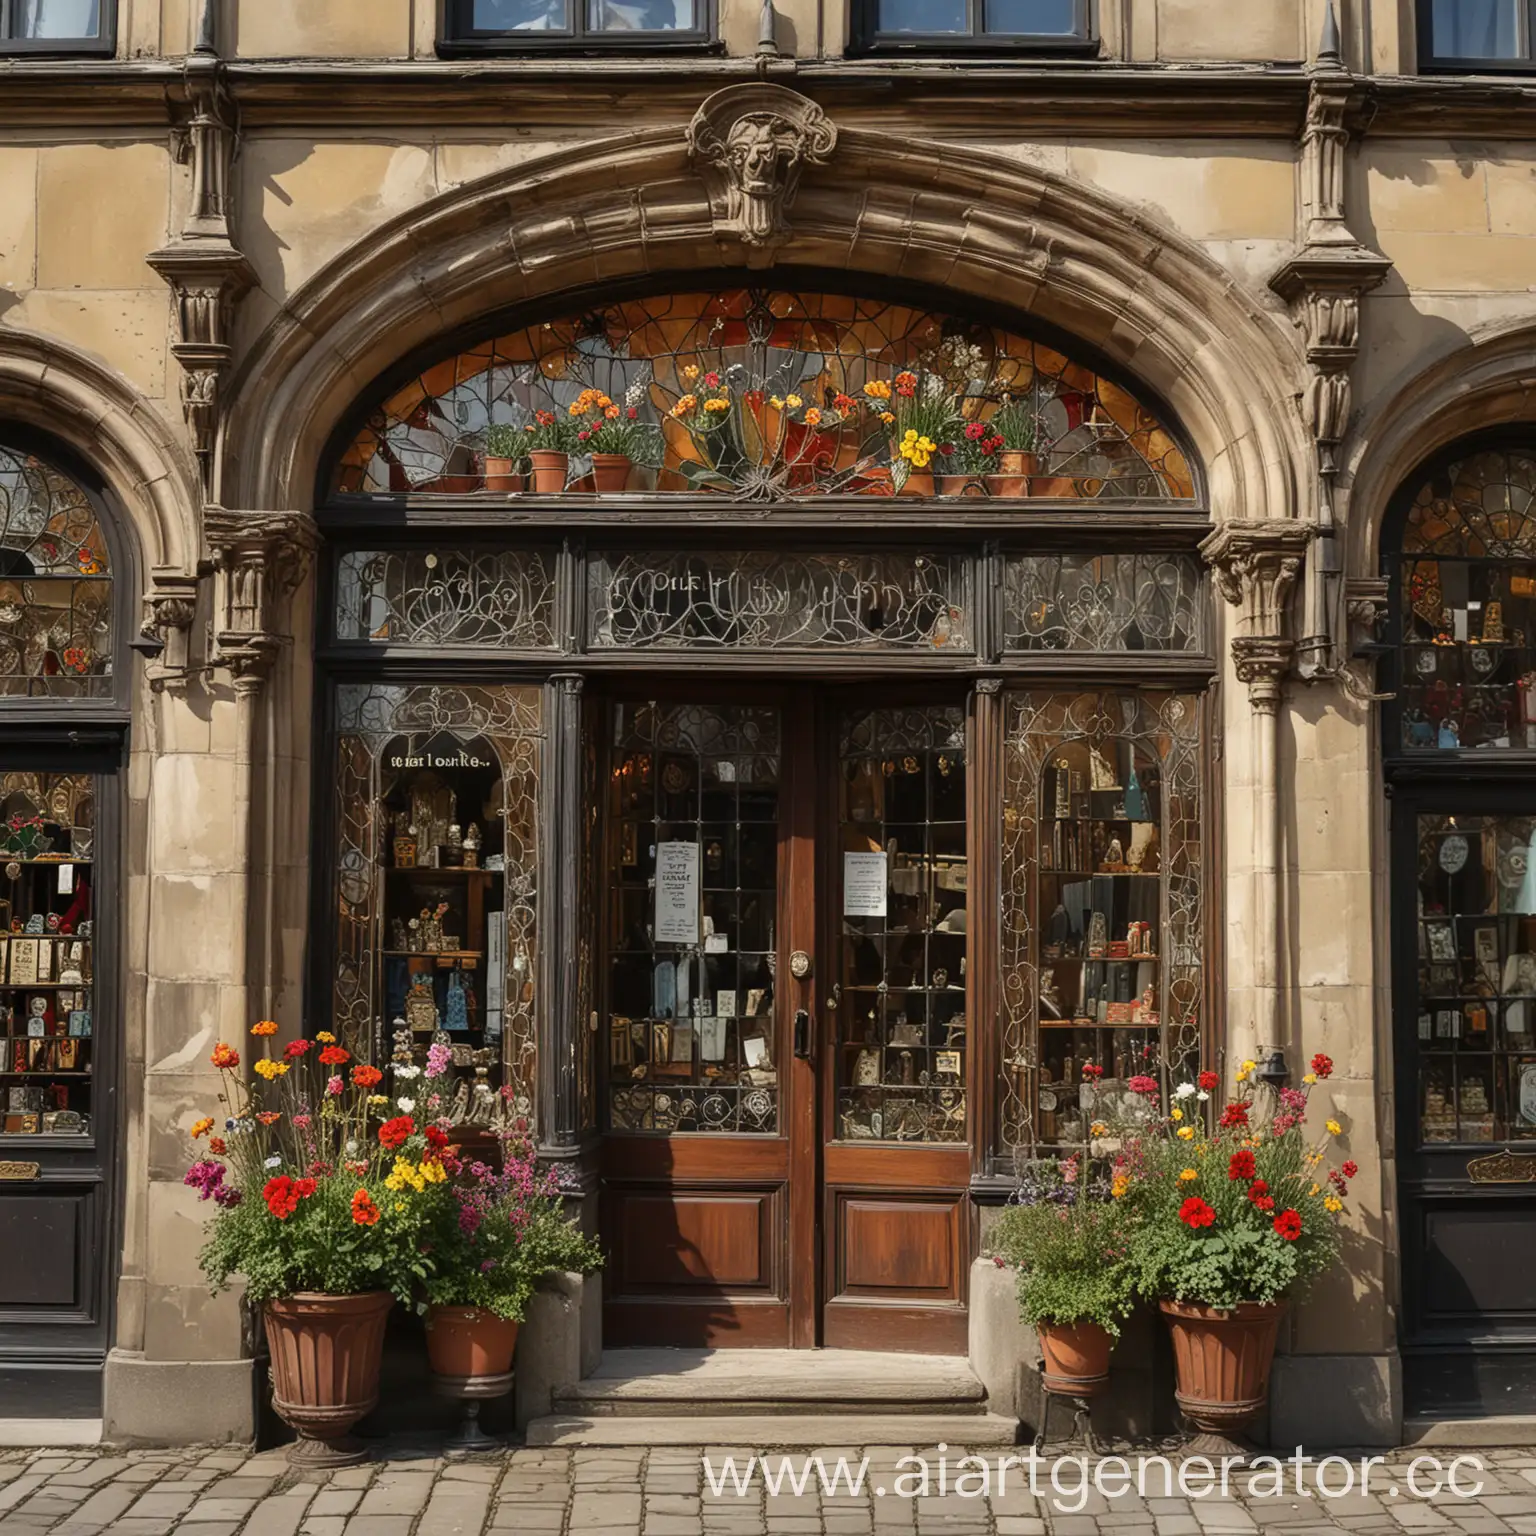 Charming-19th-Century-Antique-Shop-with-Vintage-Treasures-and-Gothic-Architecture